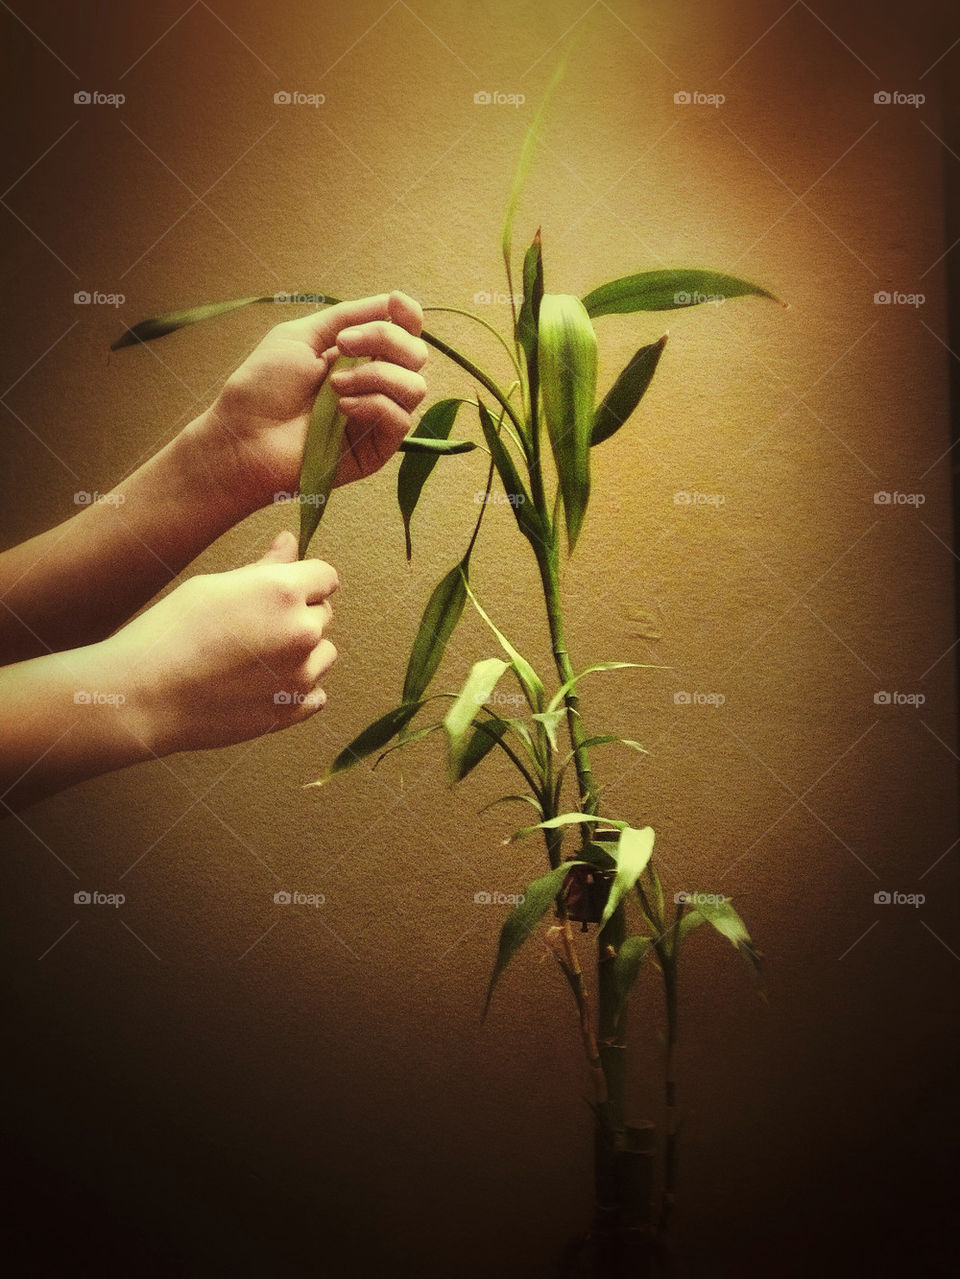 About hands and lucky plants...